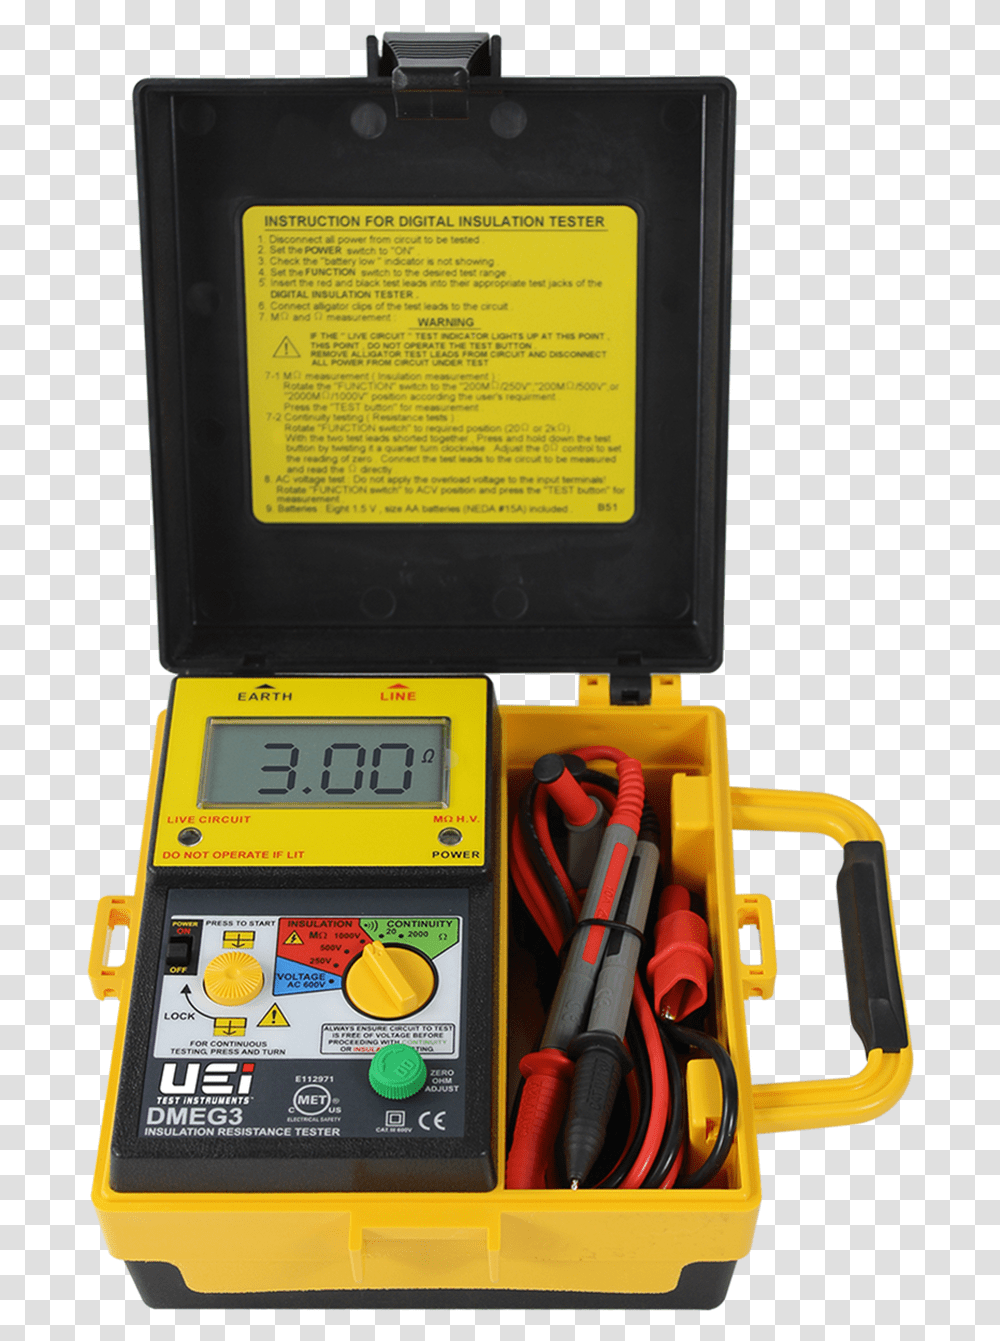 Uei Dmeg3 Digital Insulation Resistance Tester Electronics, Bomb, Weapon, Weaponry, Dynamite Transparent Png